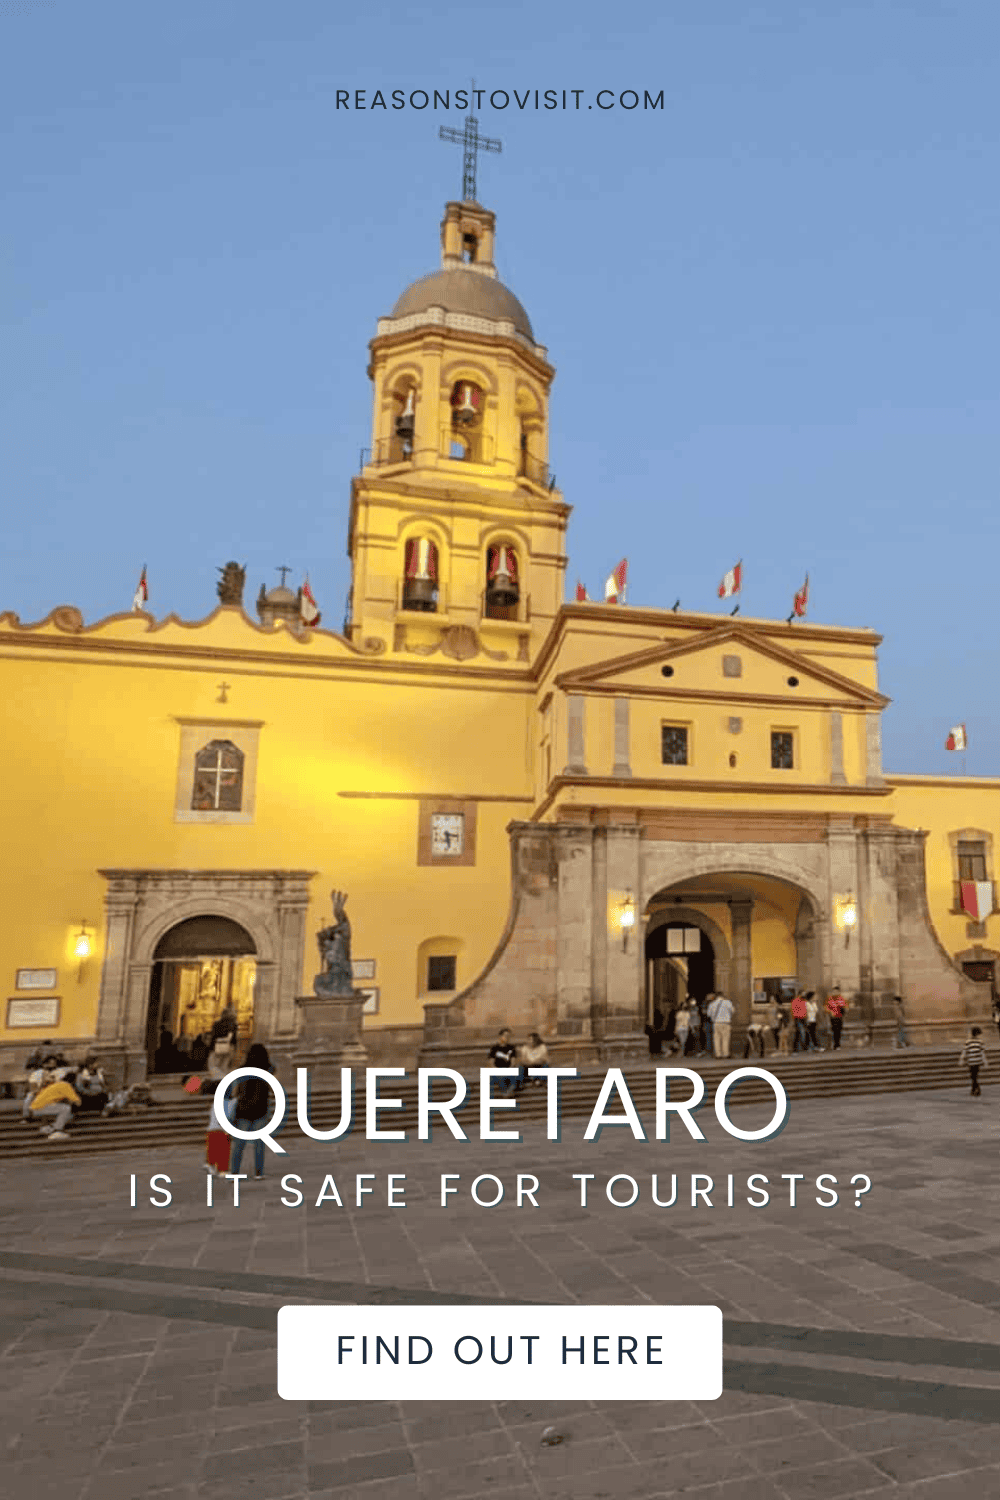 Mexico gets battered in the media when it comes to traveller safety (unfairly in my opinion), but is the interesting city of Queretaro safe for tourists, or should it be bypassed?